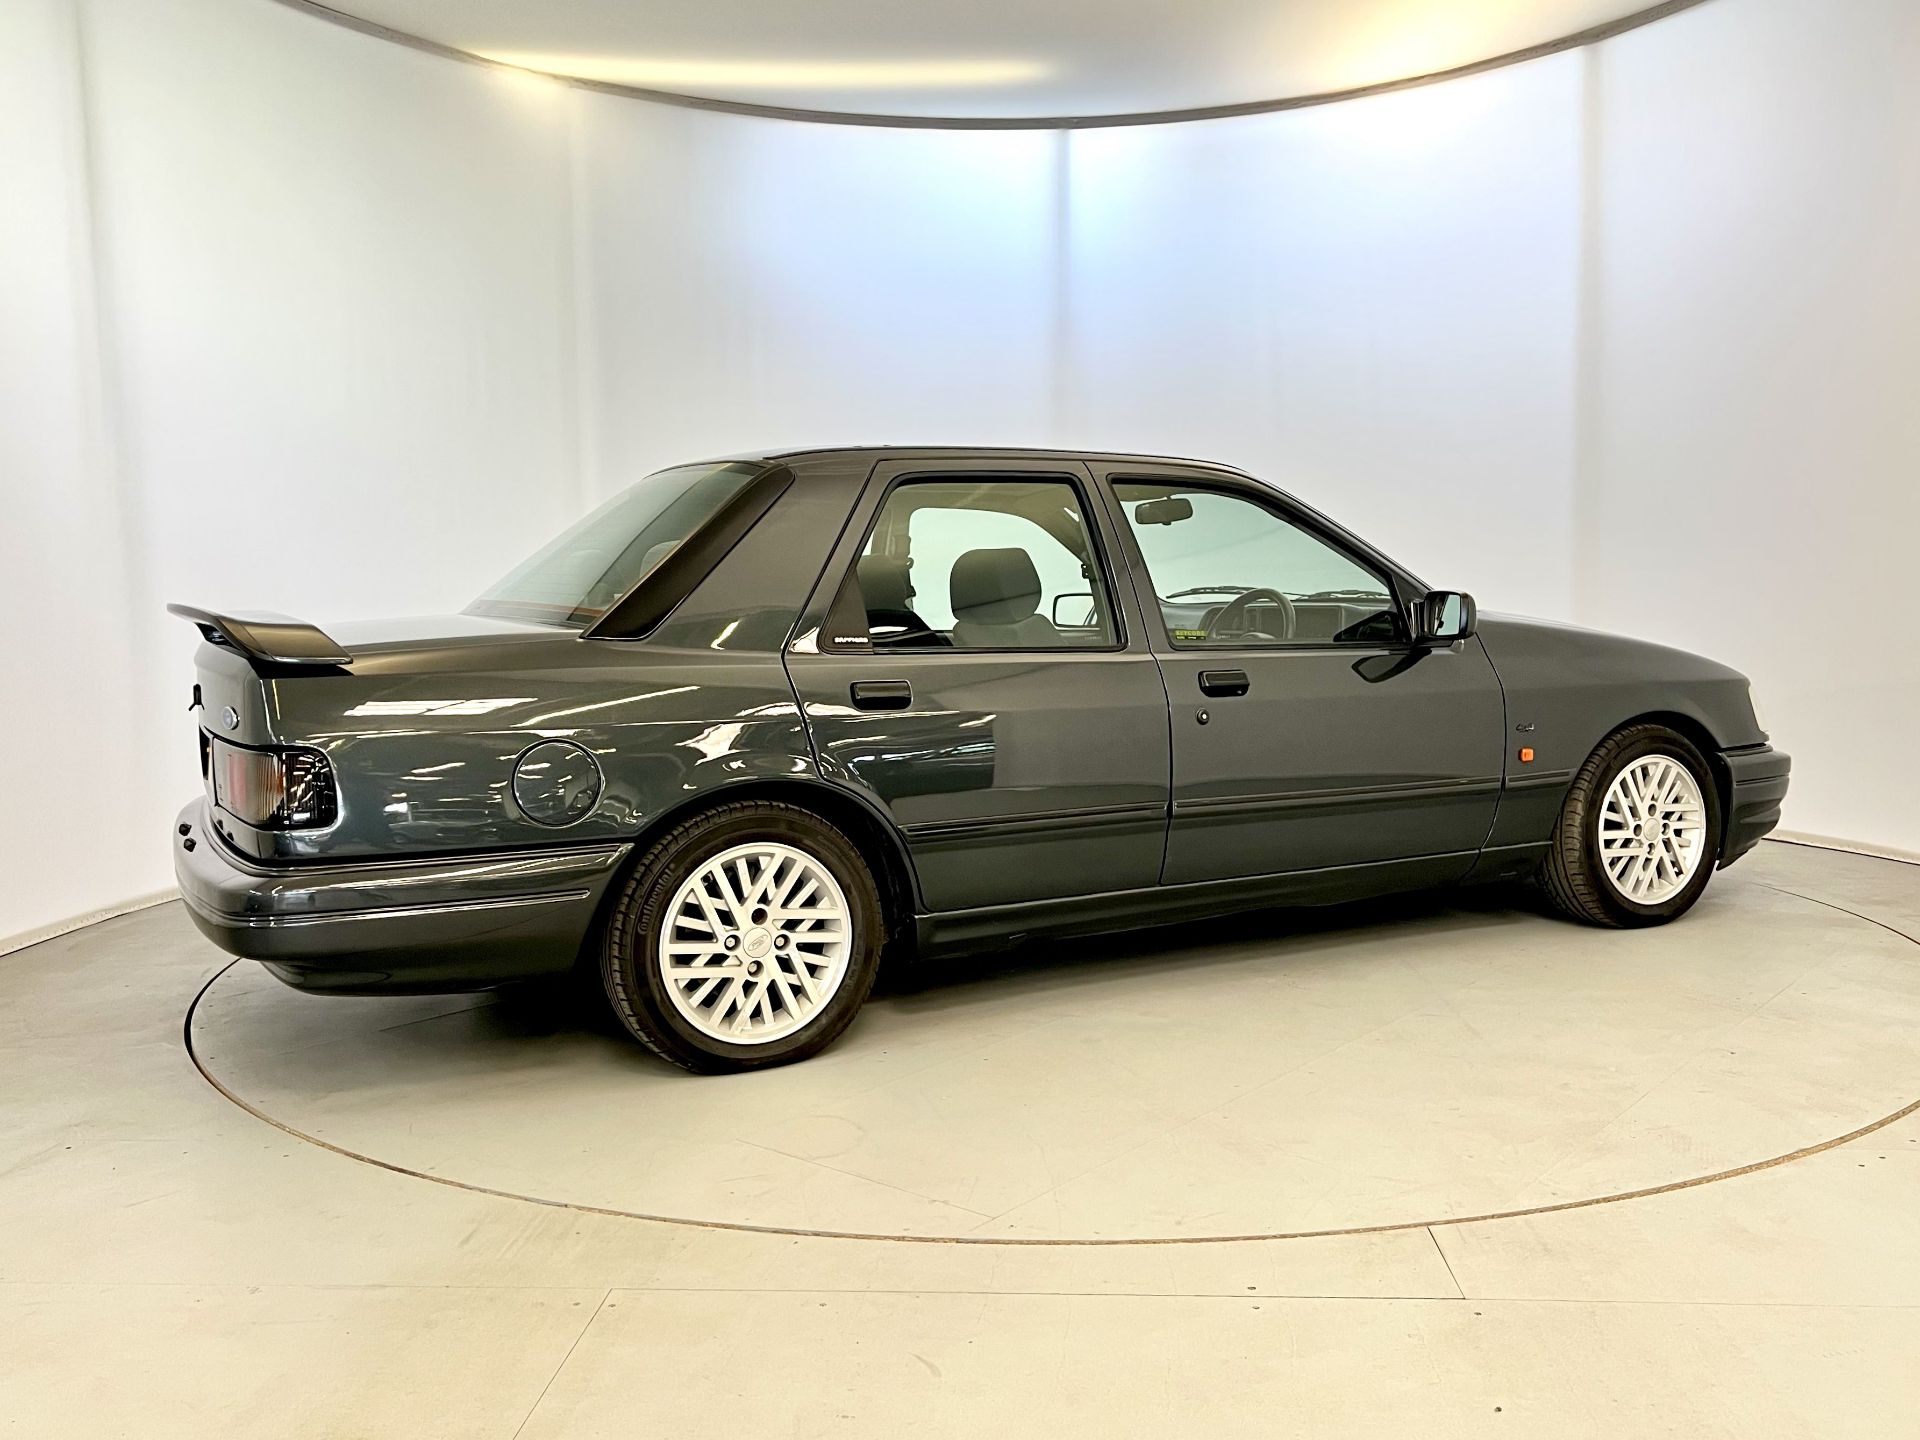 Ford Sierra Sapphire Cosworth - Image 10 of 37